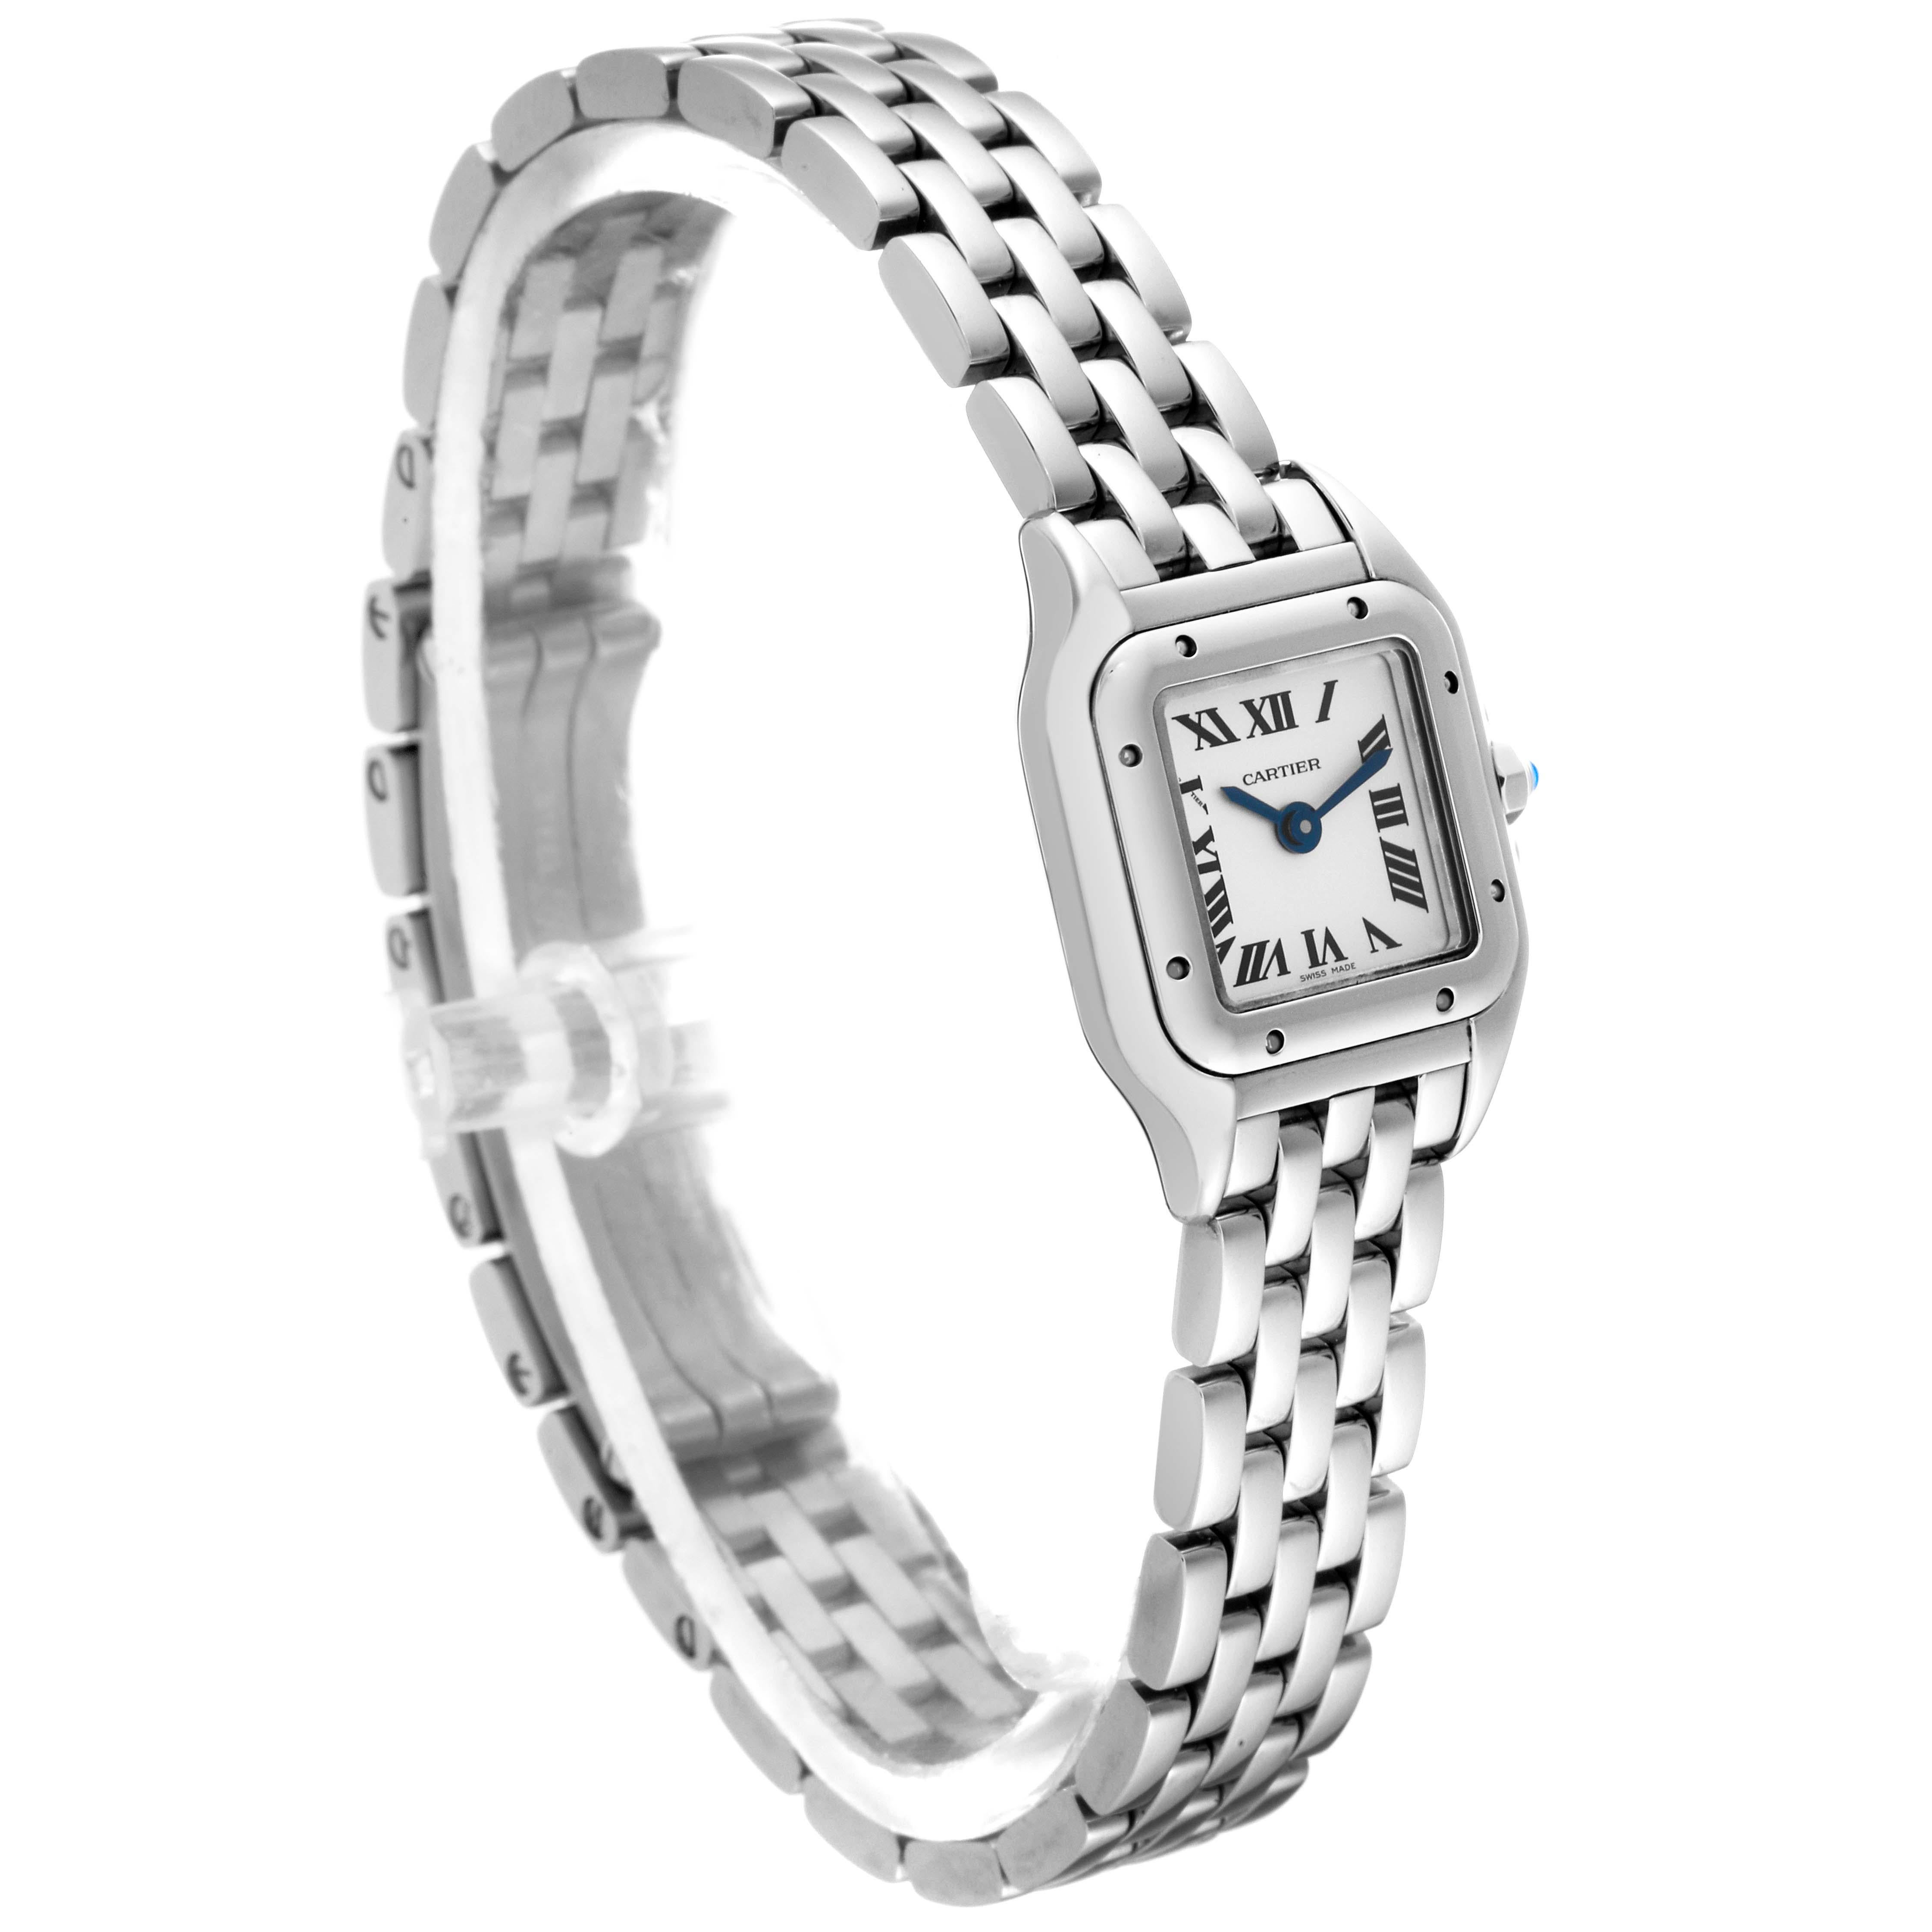 Cartier Panthere Mini Stainless Steel Ladies Watch WSPN0019 Unworn For Sale 5